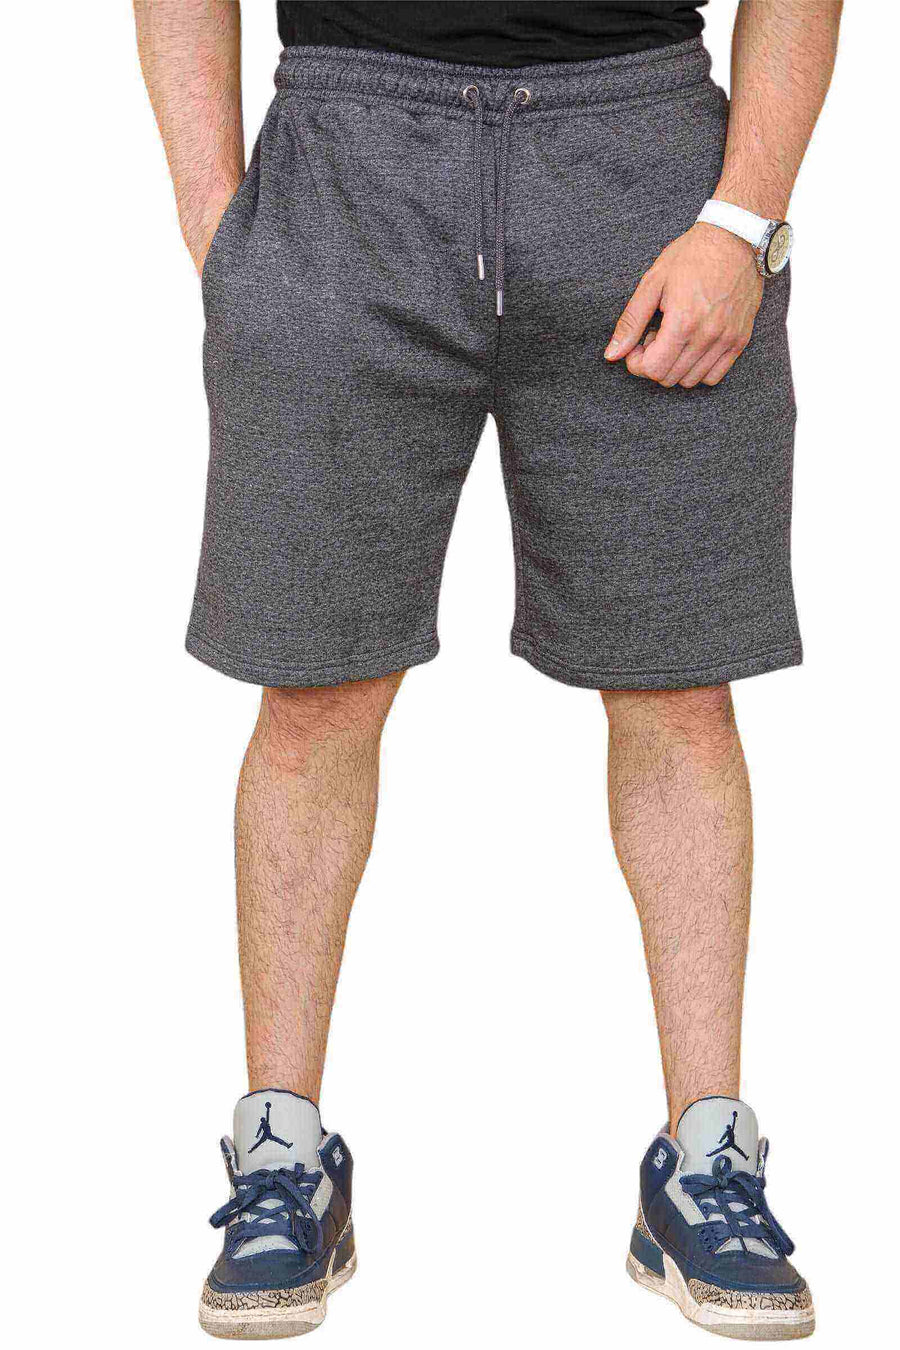 Close View of Men's Gym Shorts in Charcoal for Your Active Lifestyle